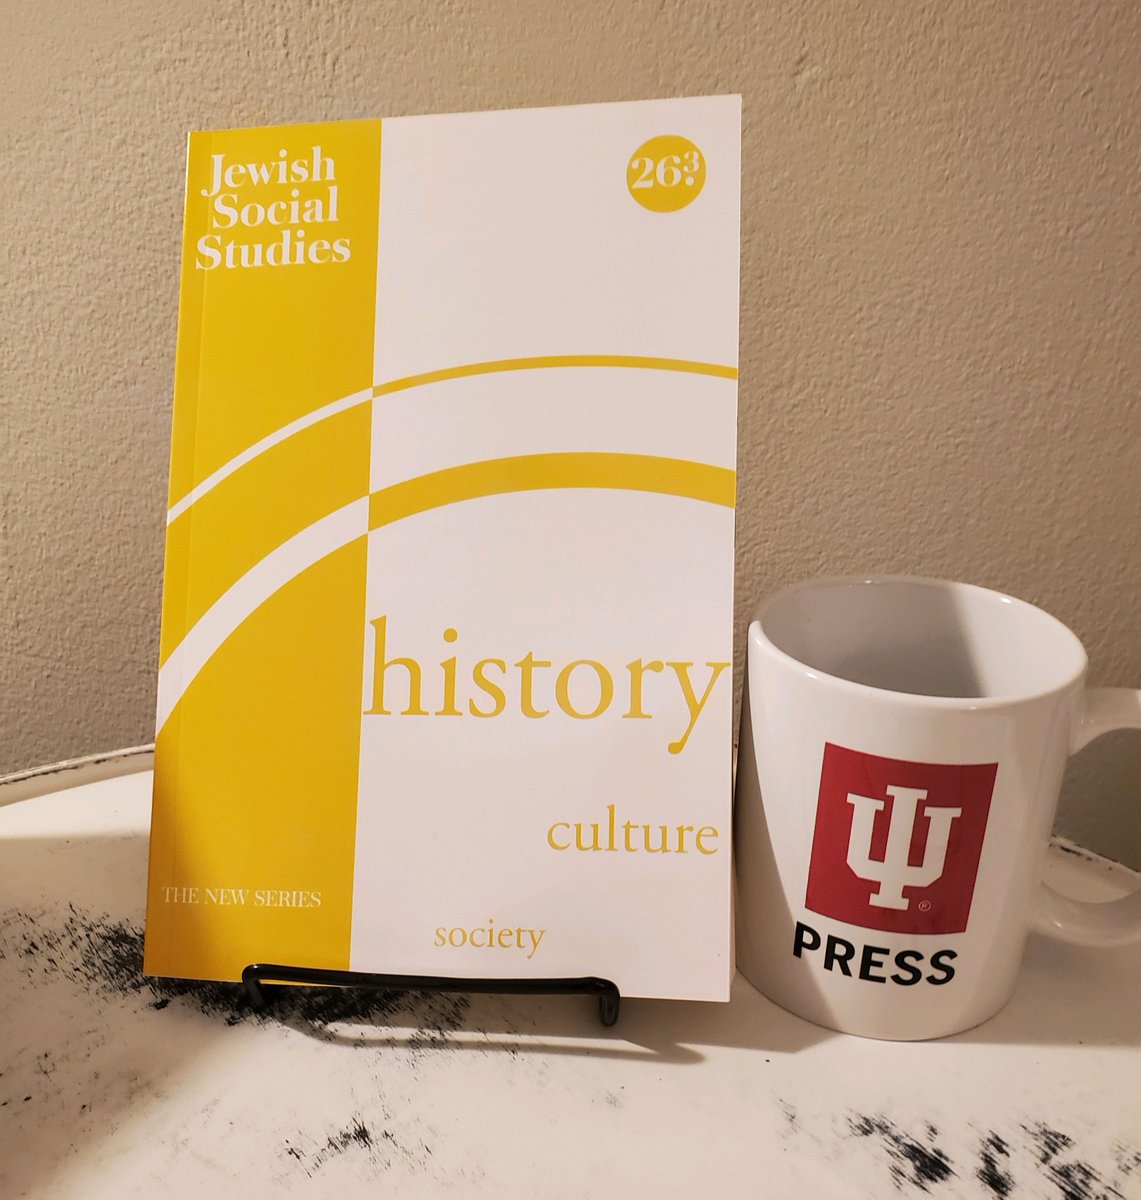 Begin scholarly research in your field @IUPJournals with Jewish Social Studies, Volume 26, #3, Fall 2021. In this issue: 'The Passionate Few': Youth and Yiddishism in American Jewish Culture. For more info: iupress.org/journals/jss/